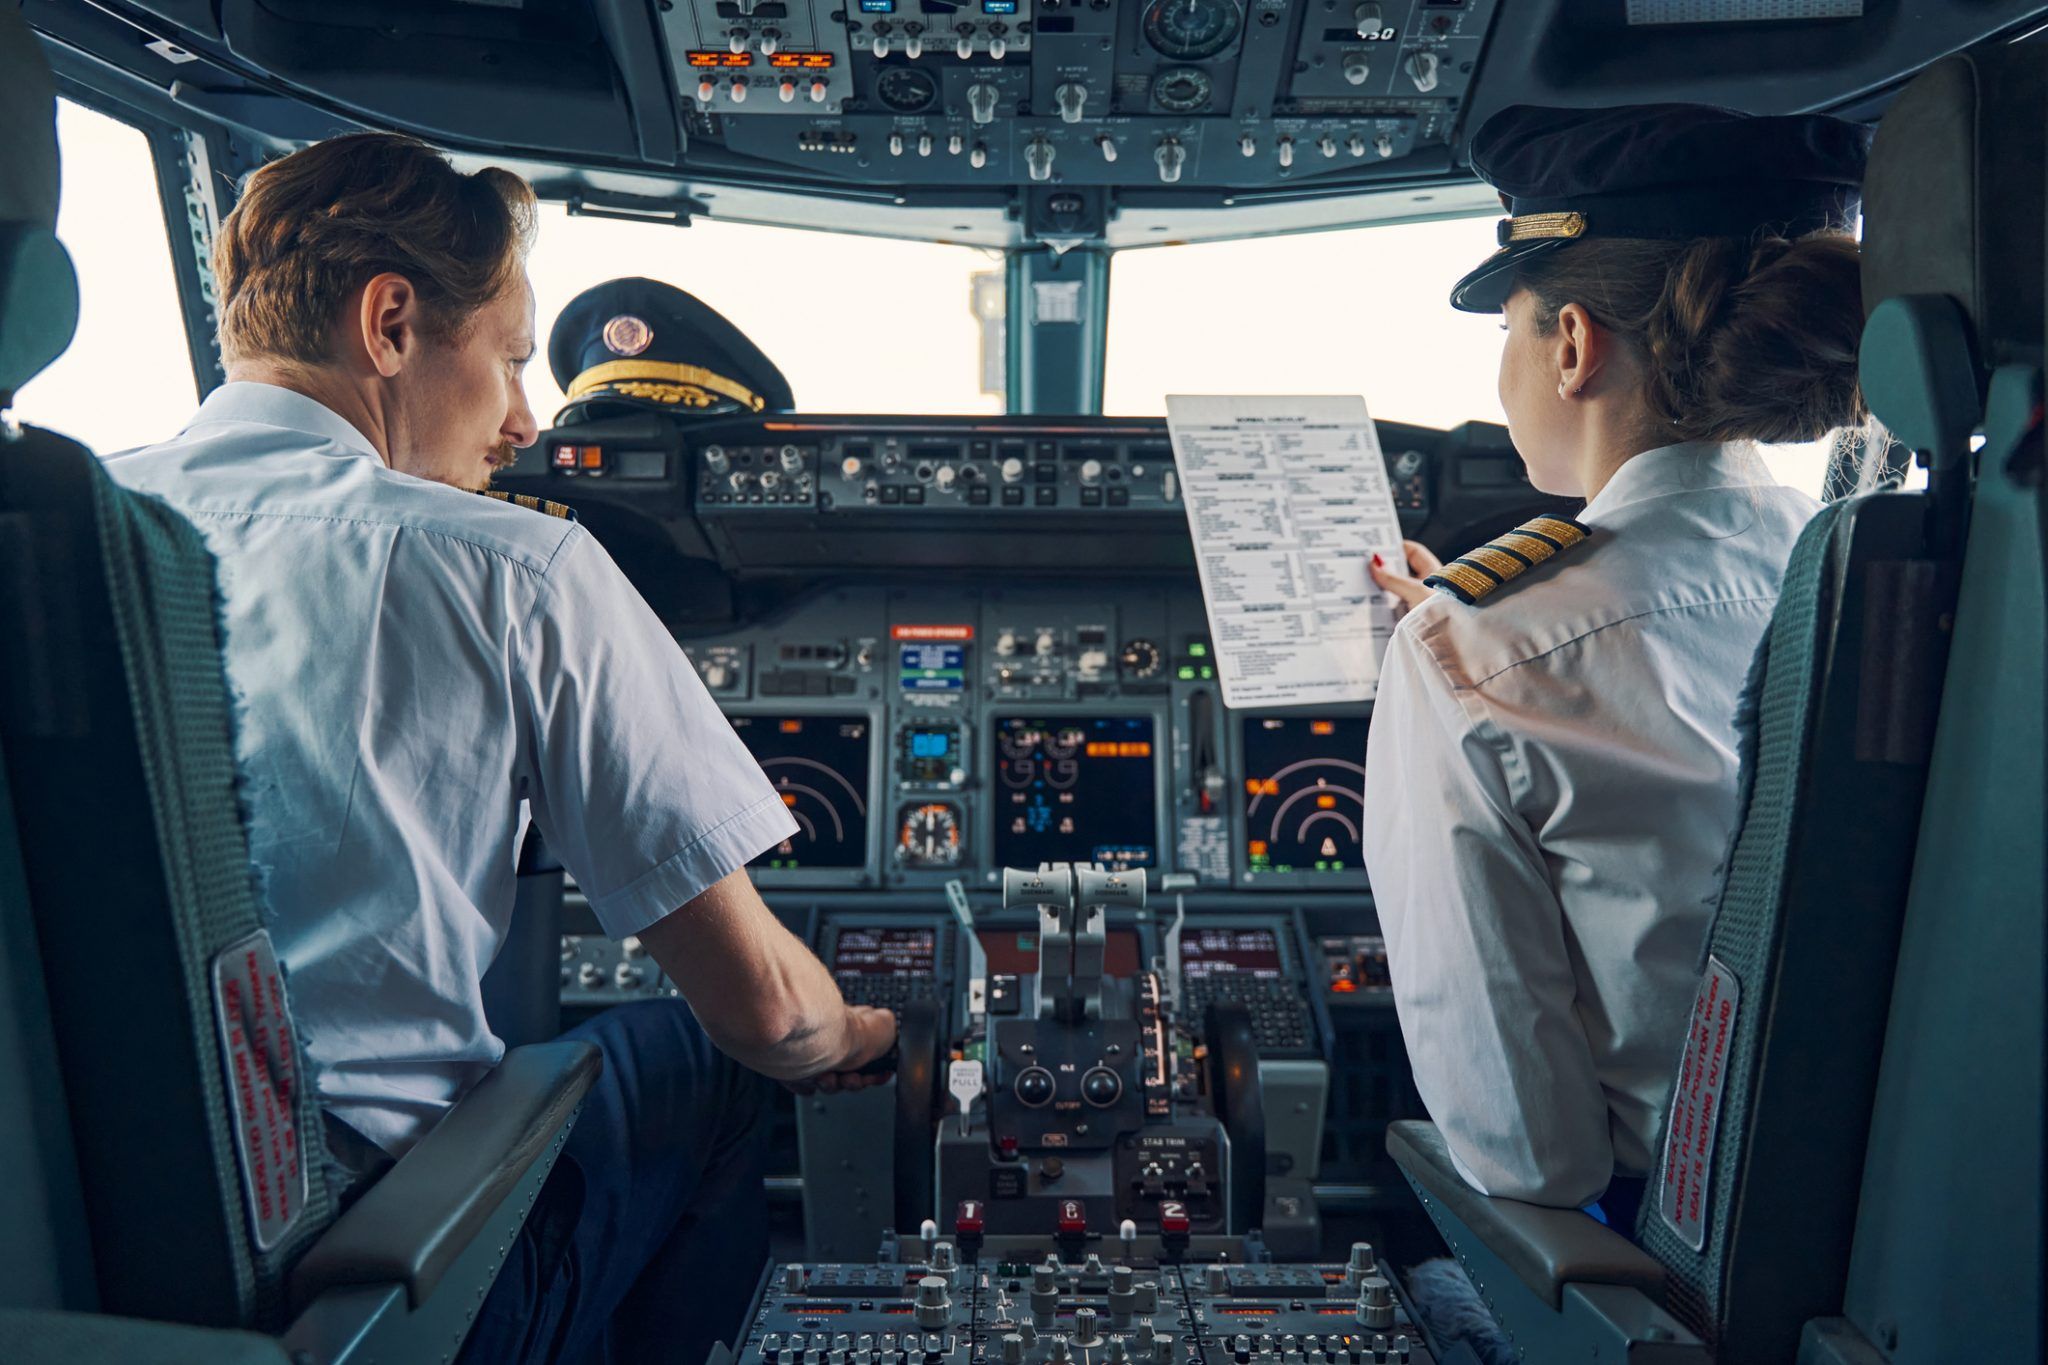 Co-pilots carry out of a range of tasks to help the pilot (iStock)